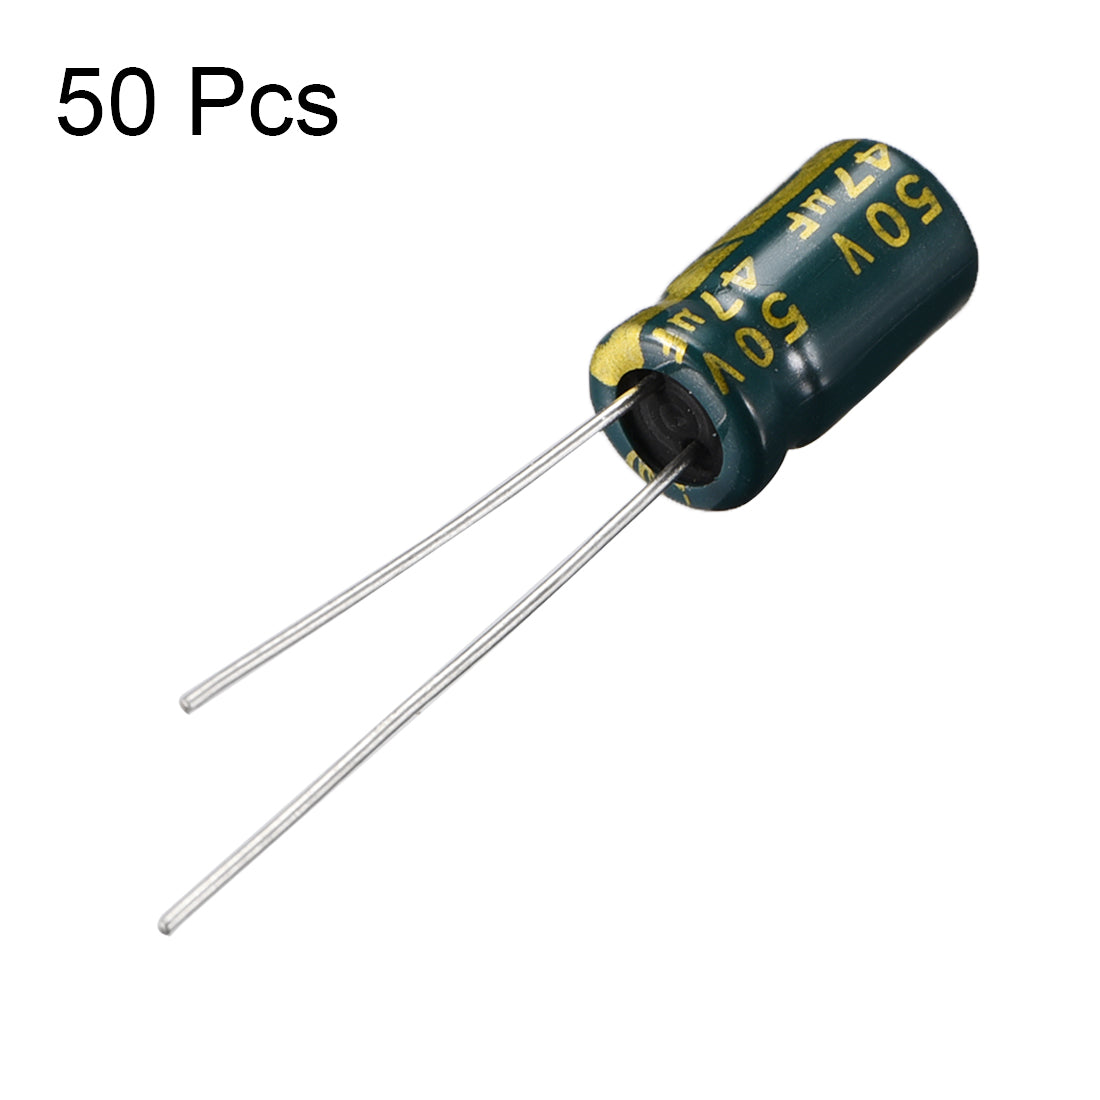 uxcell Uxcell Aluminum Radial Electrolytic Capacitor Low ESR Green with 47UF 50V 105 Celsius Life 3000H 6.3 x 11 mm High Ripple Current,Low Impedance 50pcs